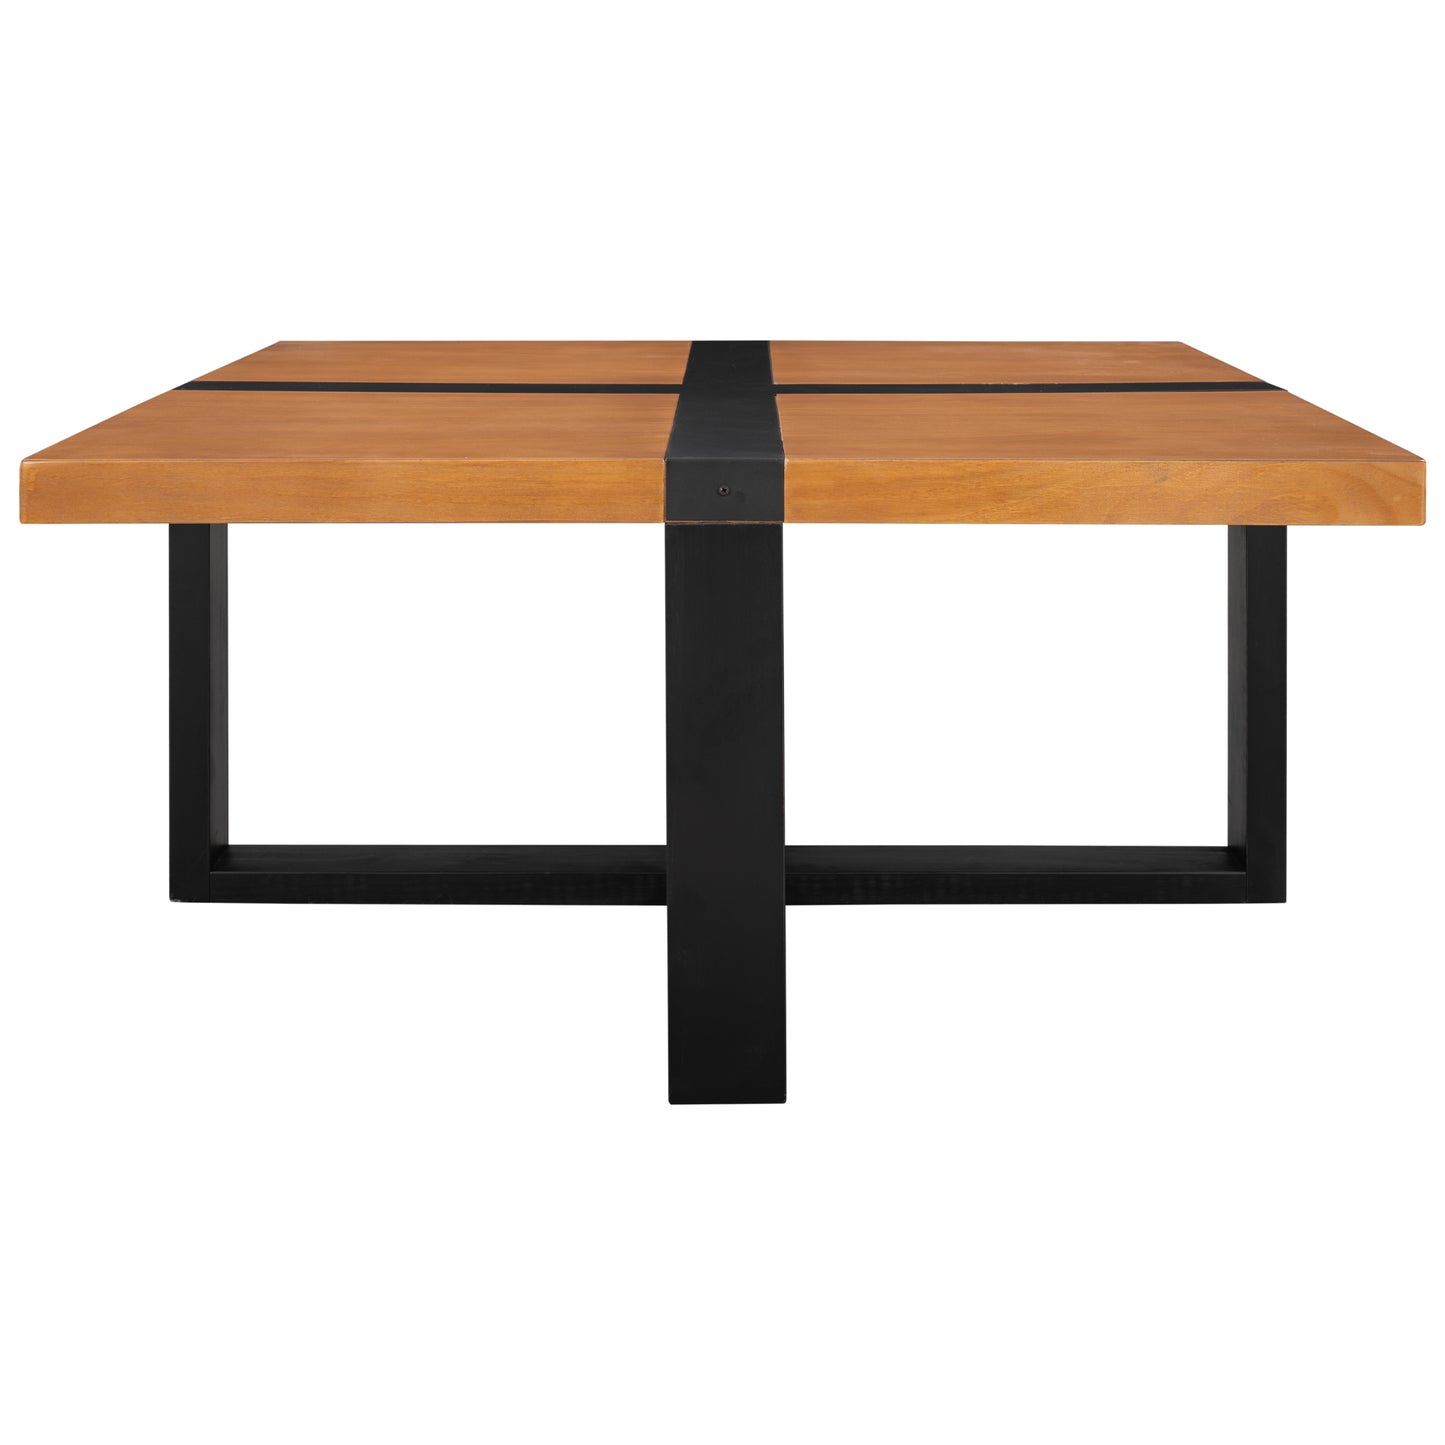 U-style Coffee Table With Crossed-shape Table Top and Wood Legs,37.4 Inch